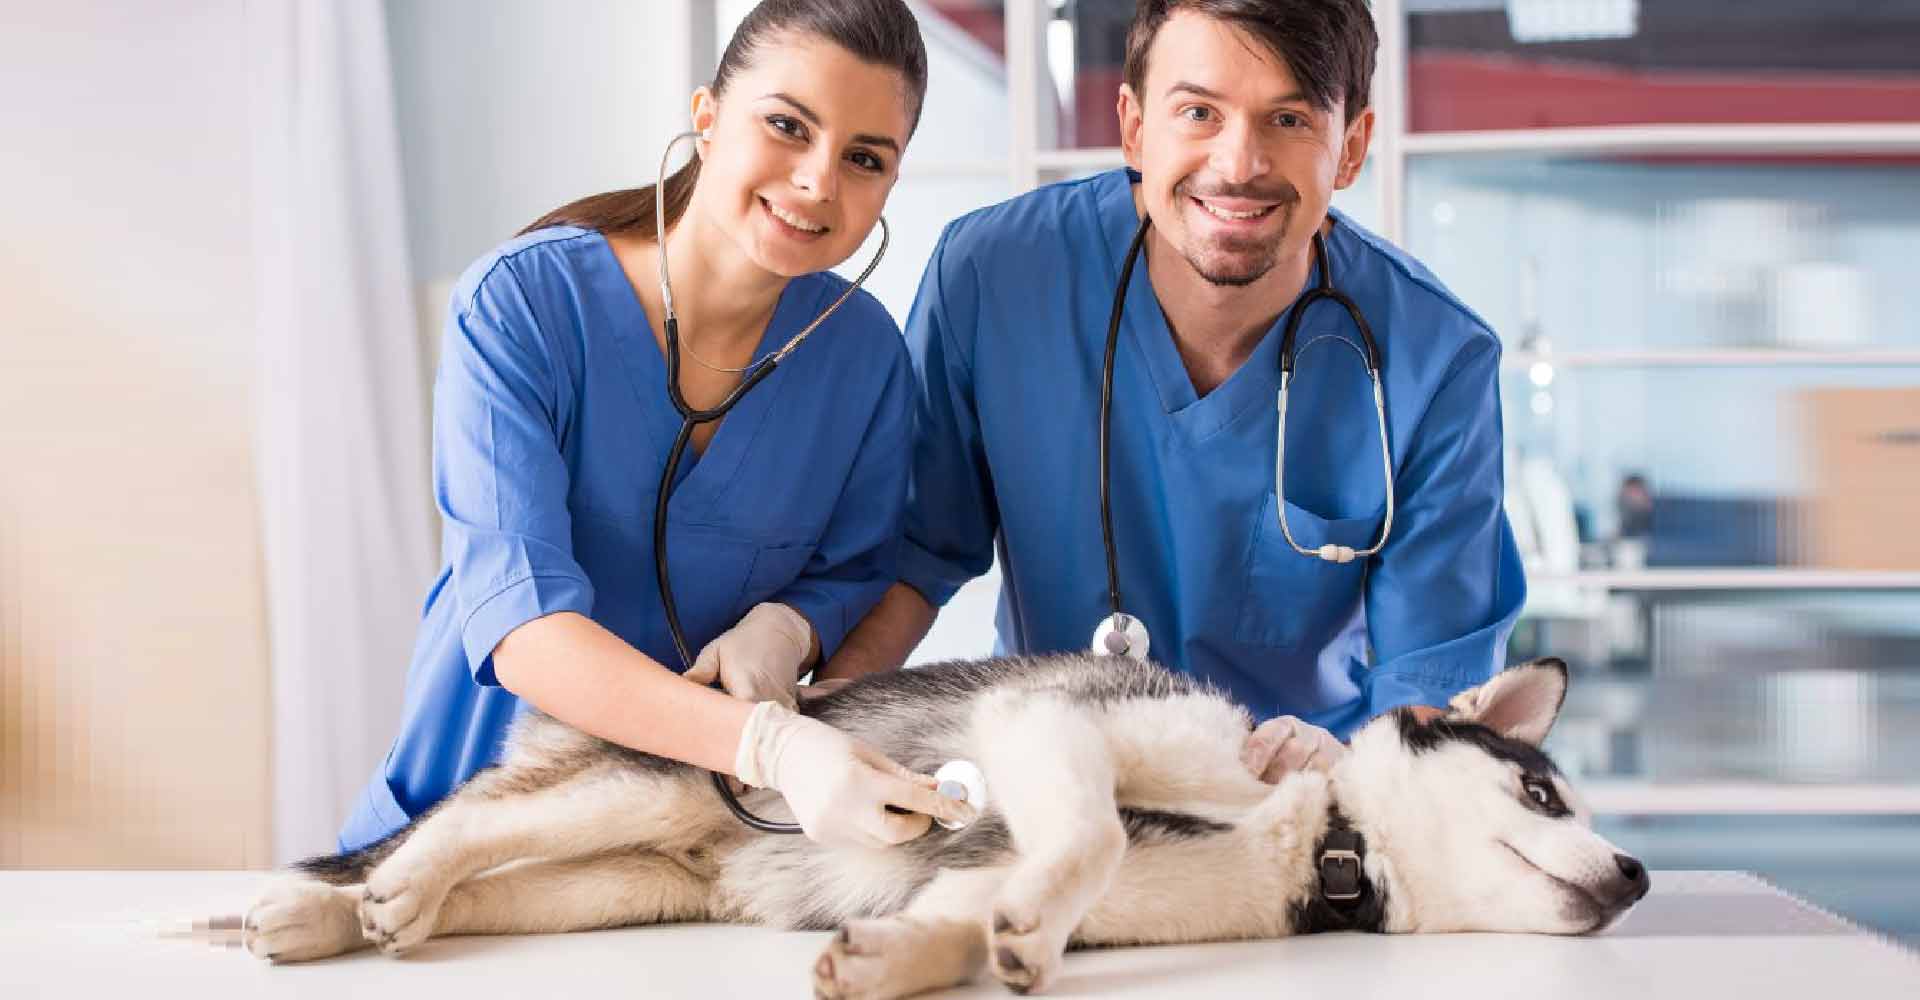 Veterinarians treating a small animal on an emergency call provided by their answering service